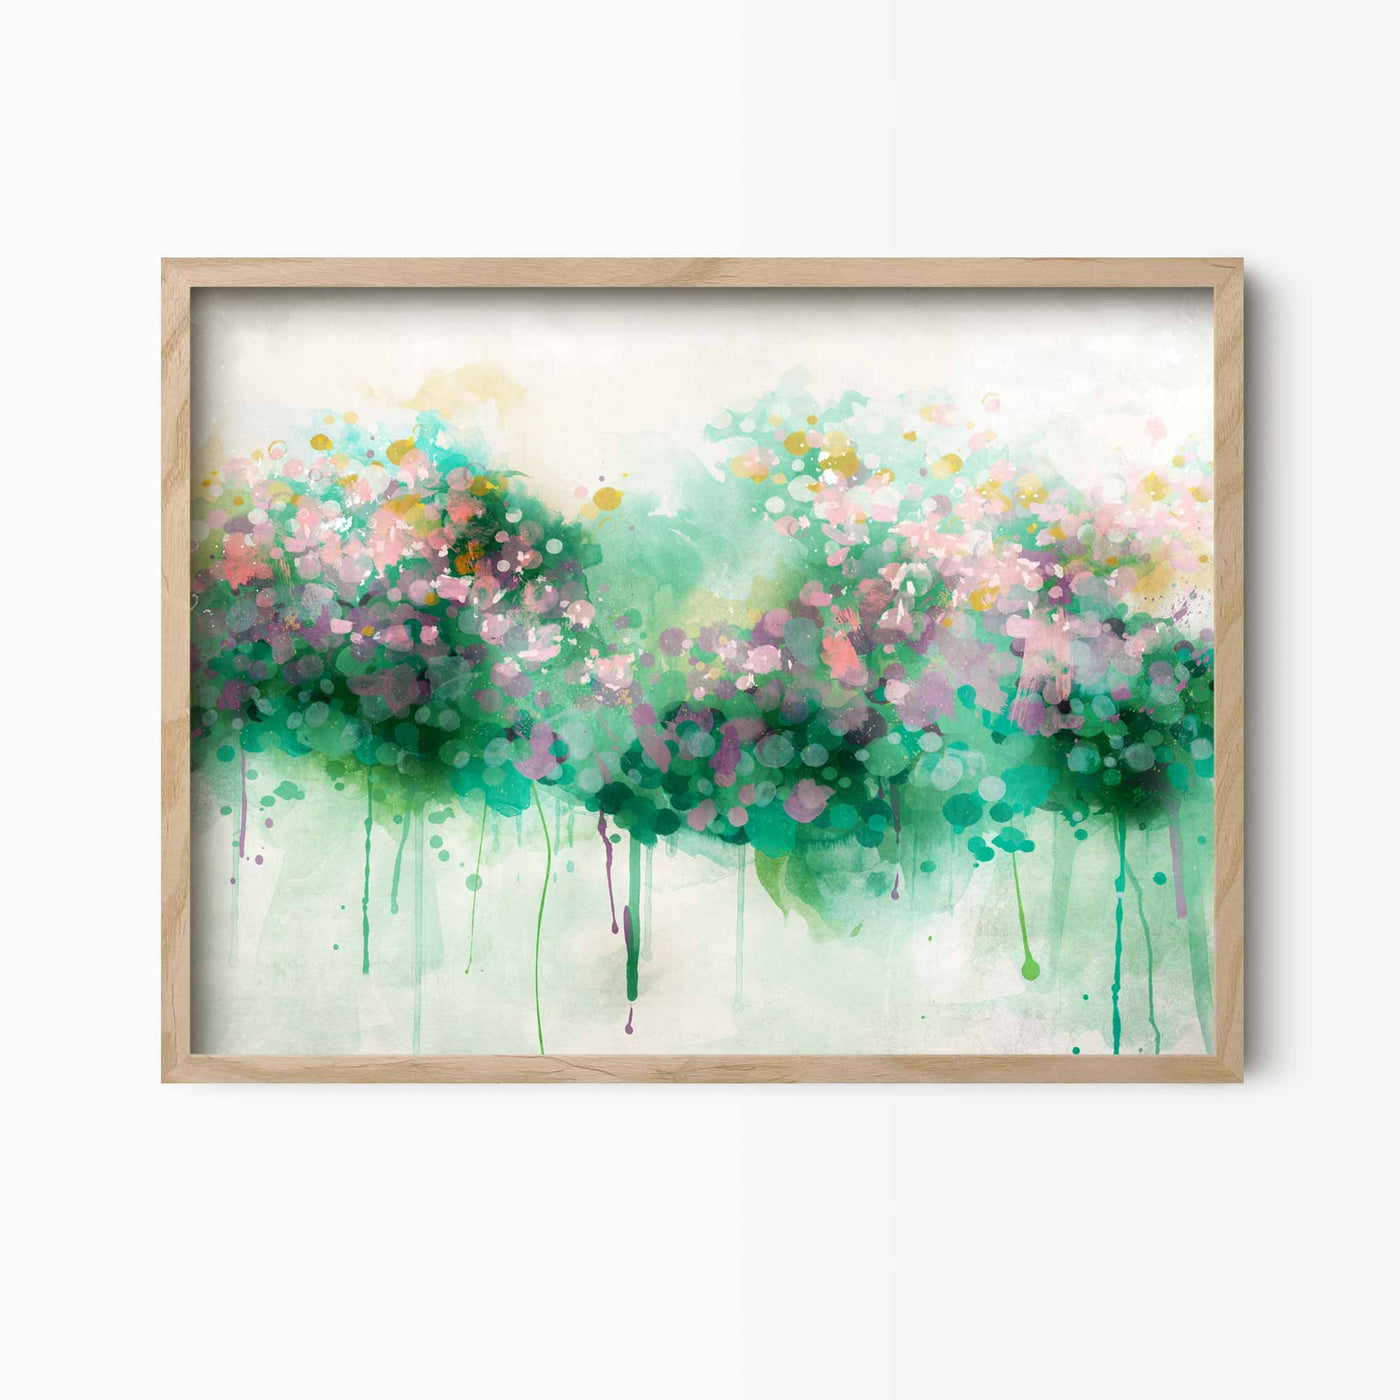 Green Lili 30x40cm / Natural Spring Bloom Abstract Floral Art Print